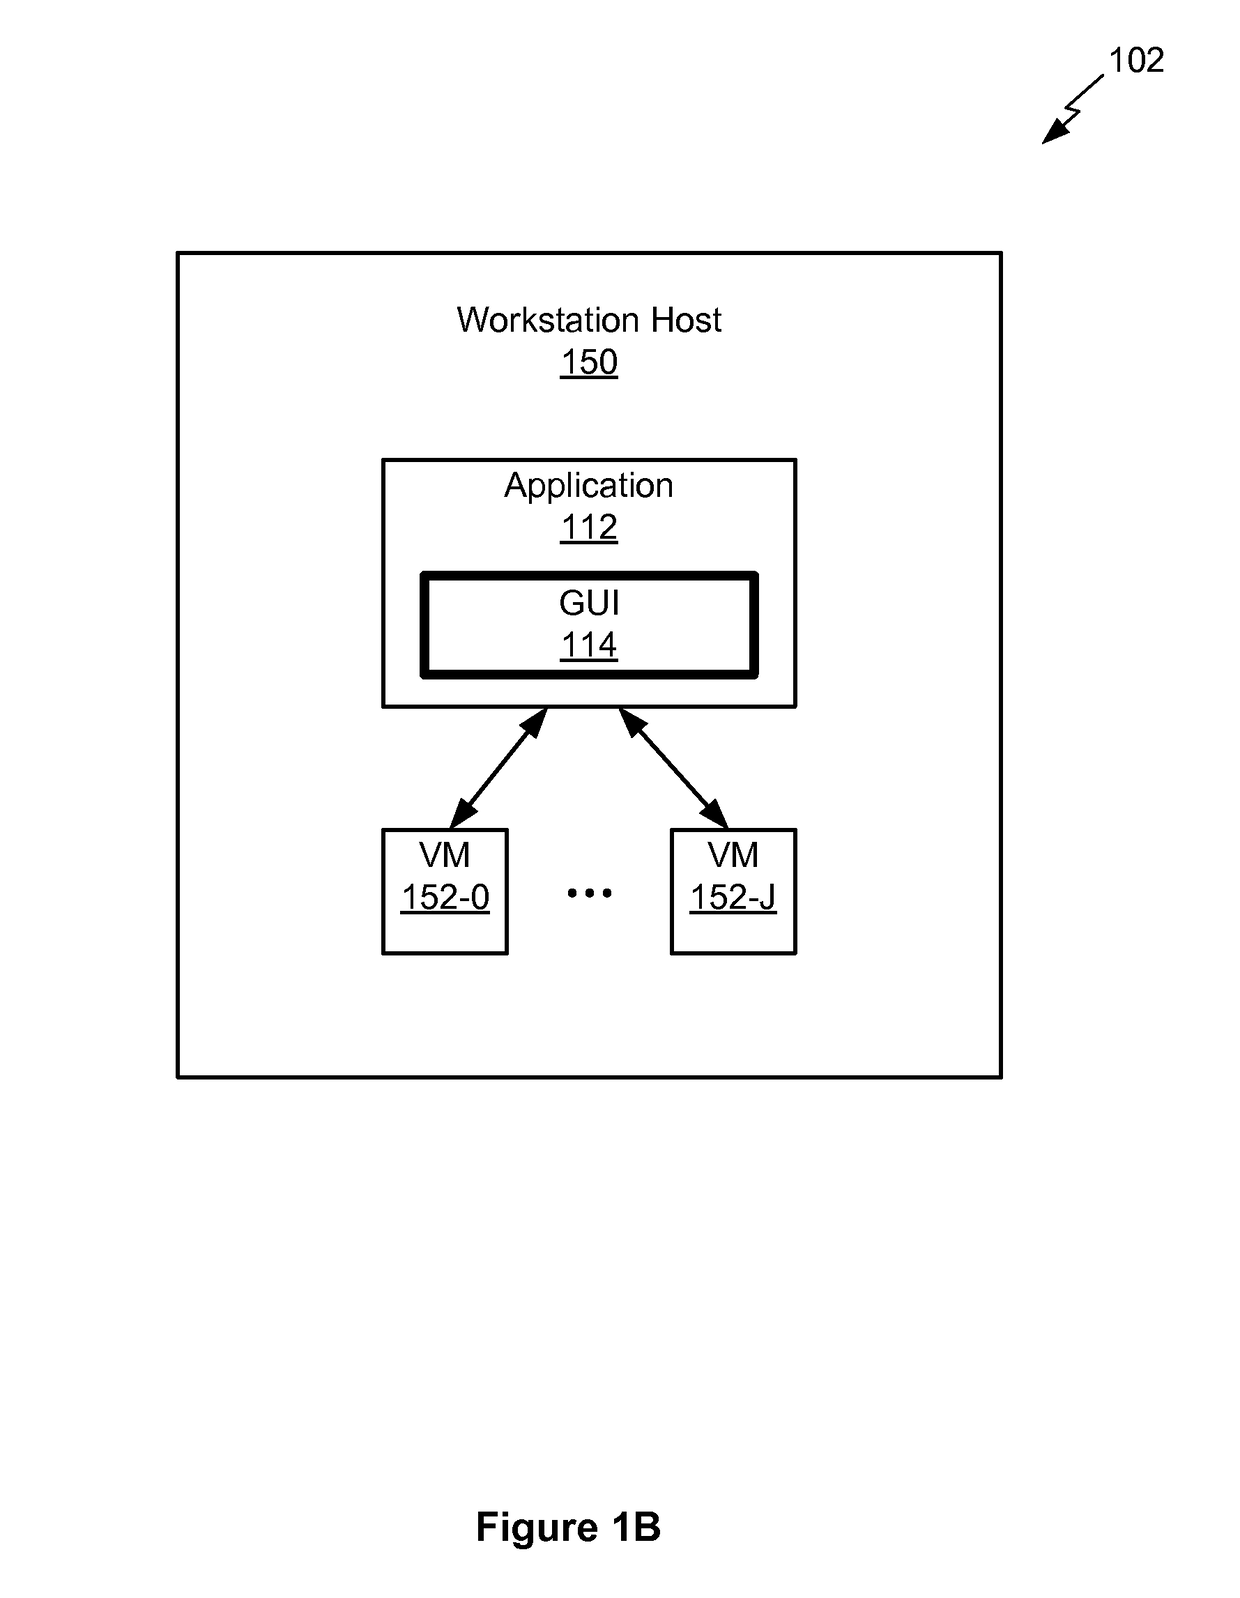 Graphical user interface for managing virtual machines